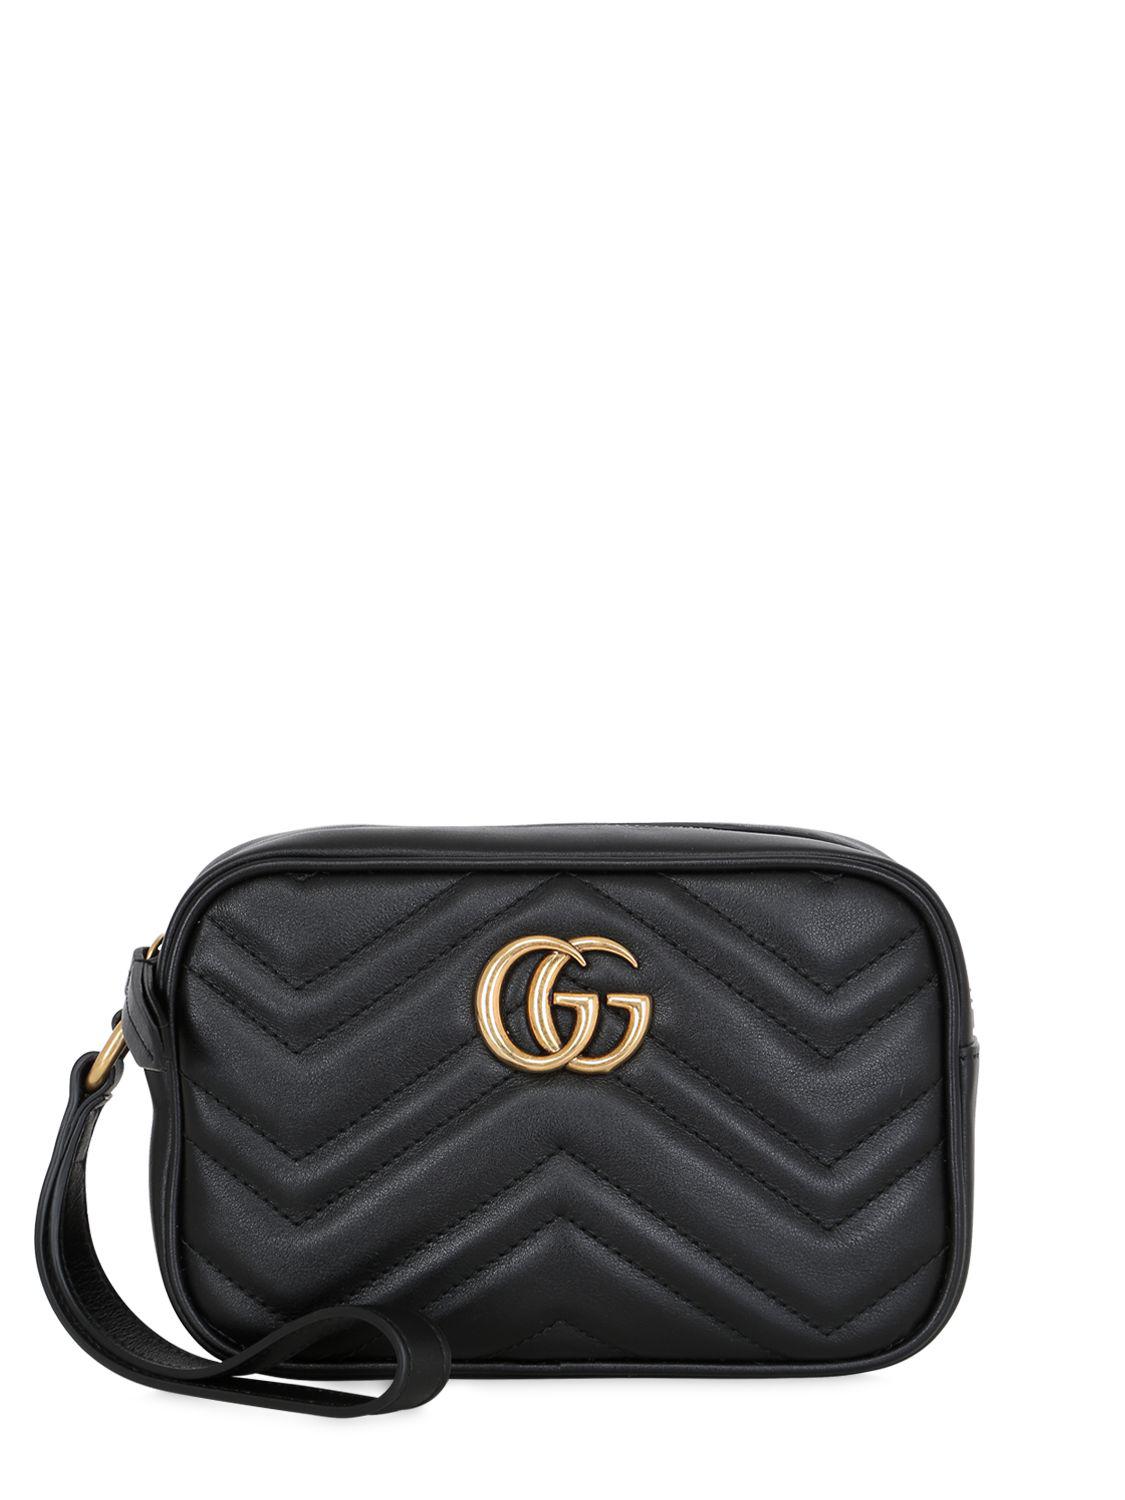 Gucci GG Marmont 2.0 Leather Shoulder Bag in Black - Lyst